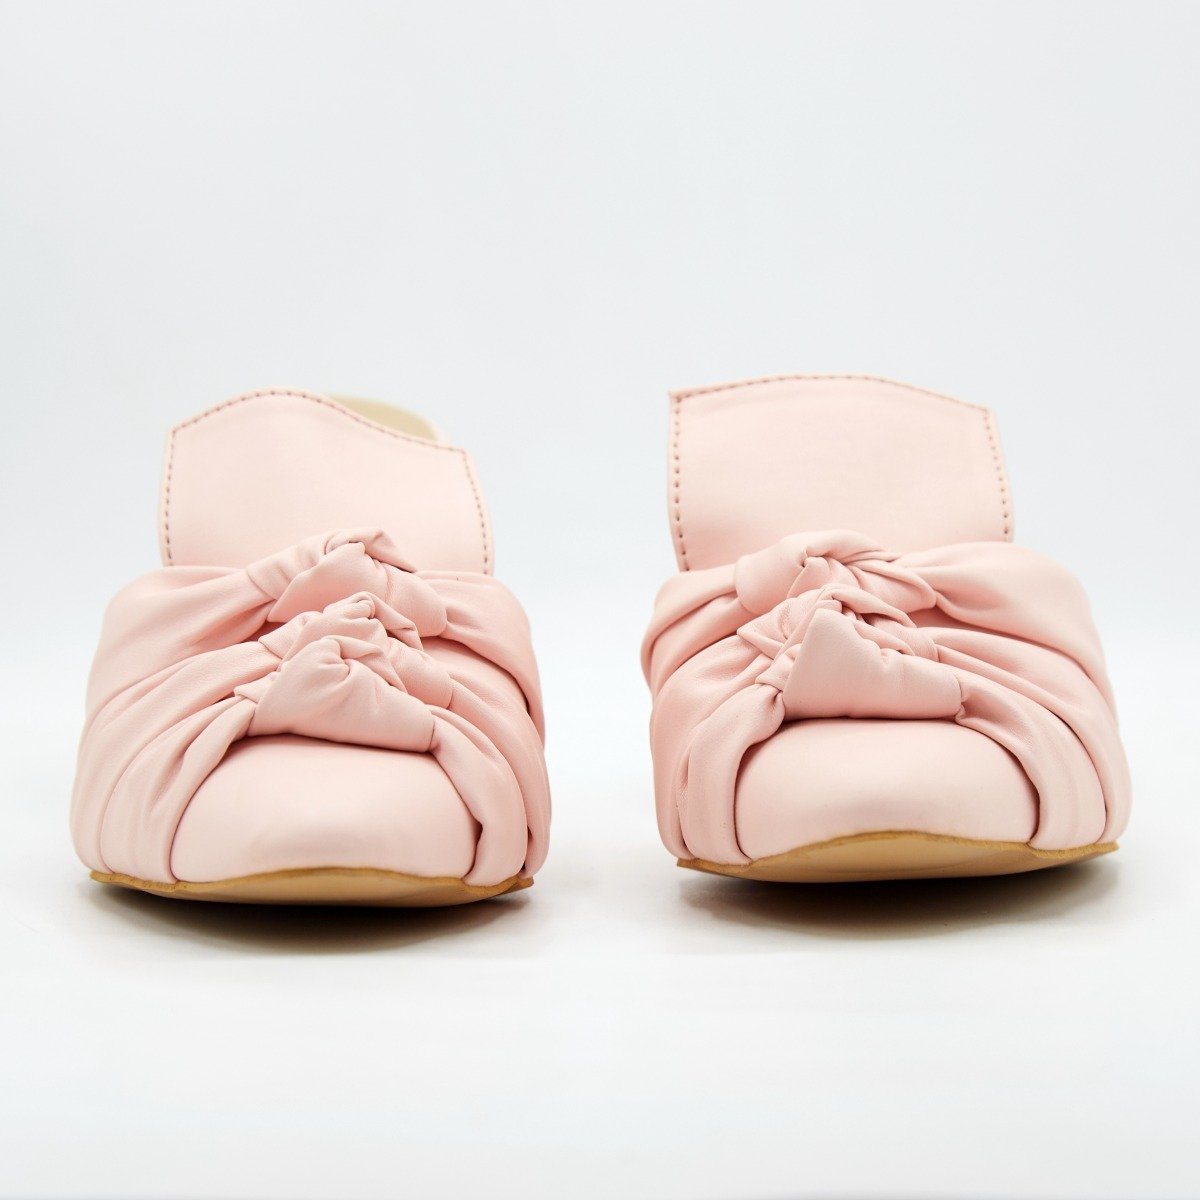 Knotted Salmon Pink Collared Mules by Boo & Babe